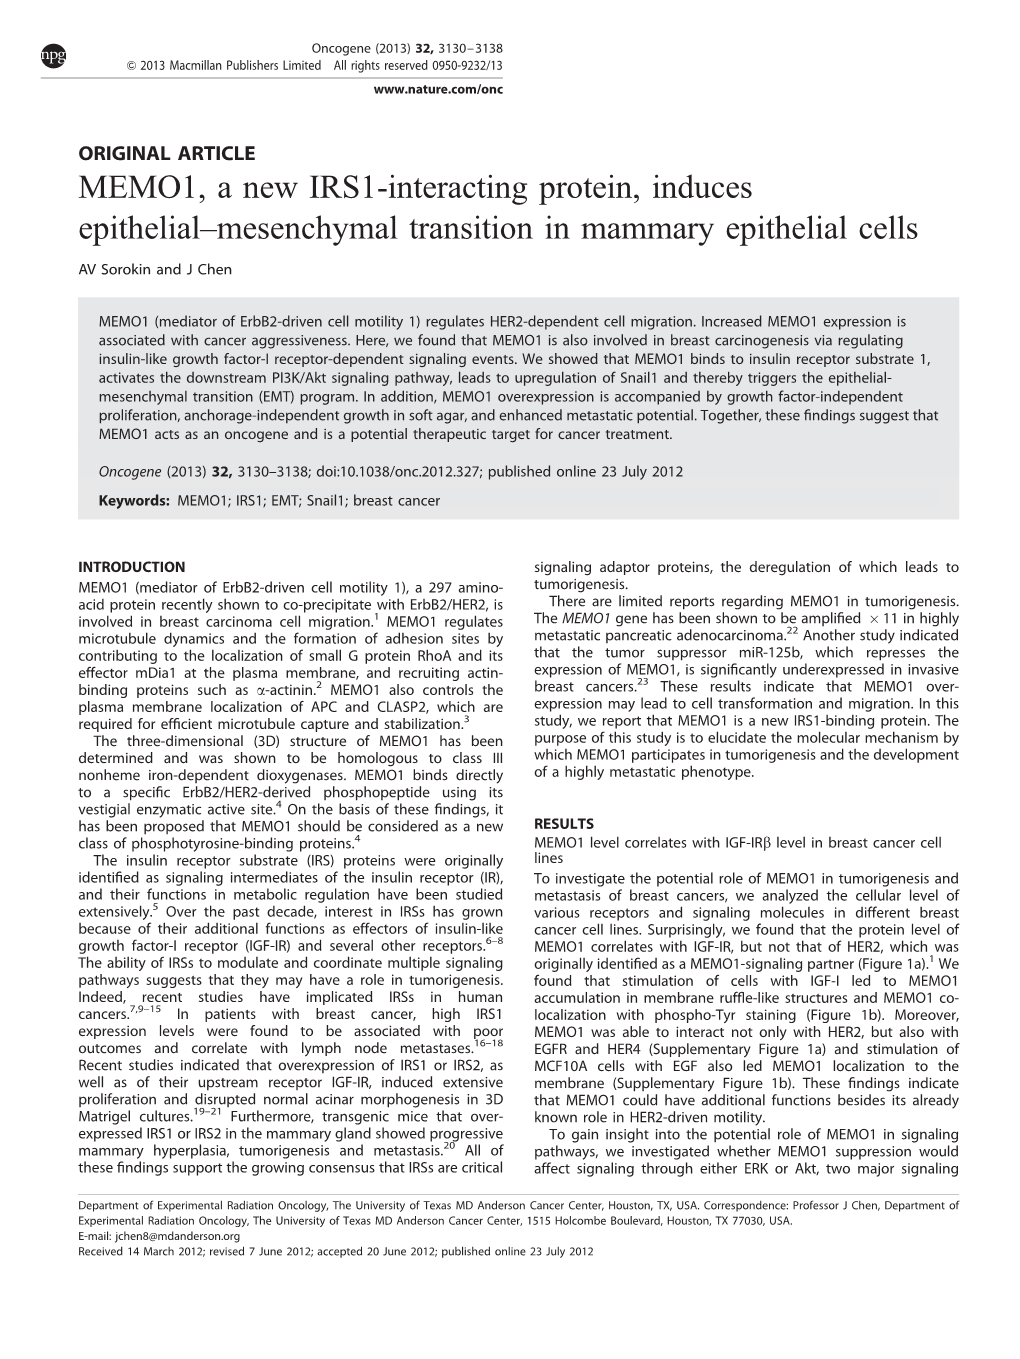 MEMO1, a New IRS1-Interacting Protein, Induces Epithelial–Mesenchymal Transition in Mammary Epithelial Cells